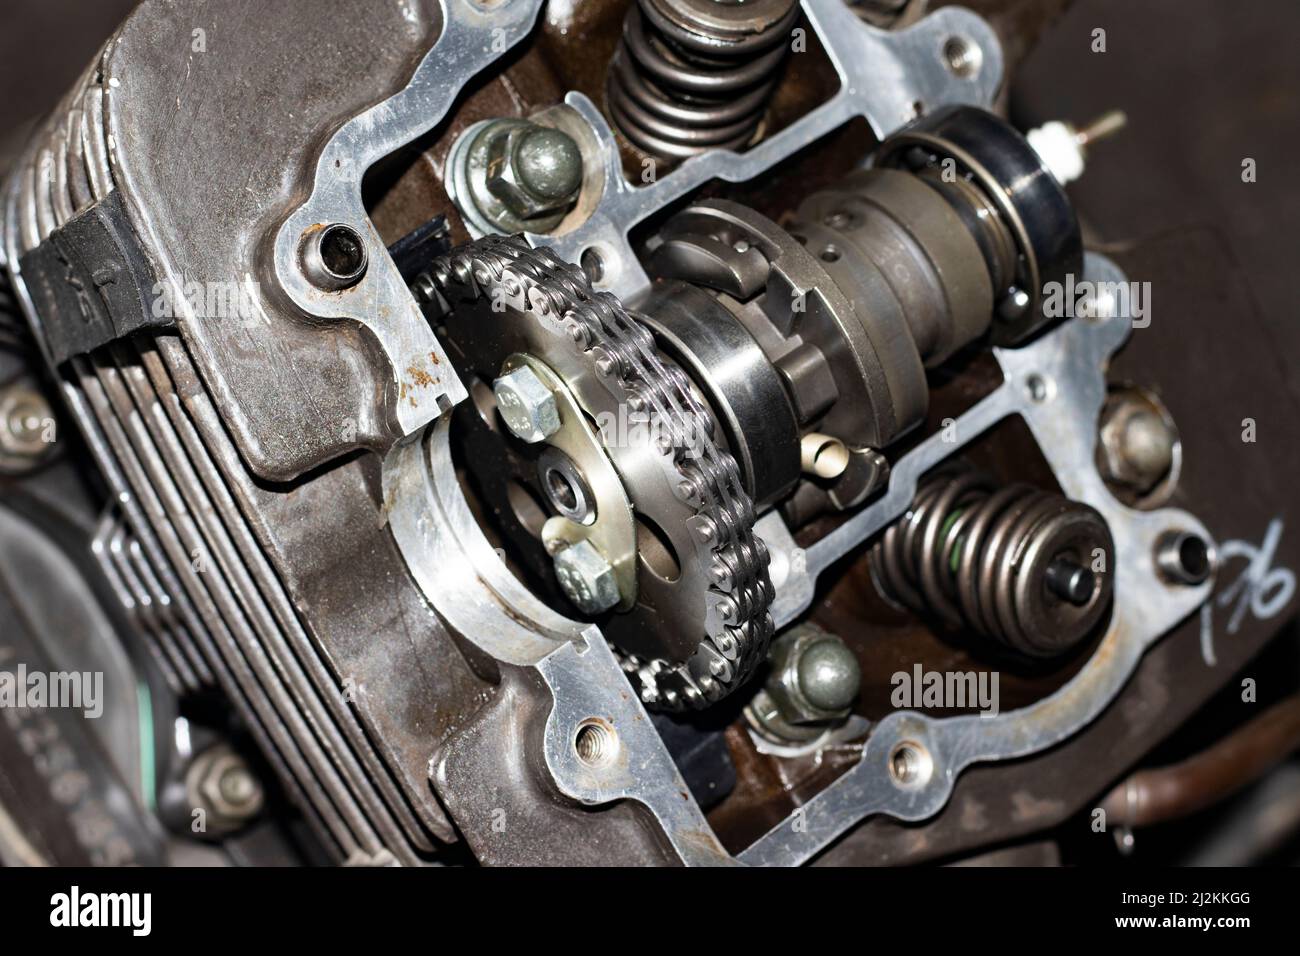 Motorcycle engine repair Servicing or cleaning Stock Photo